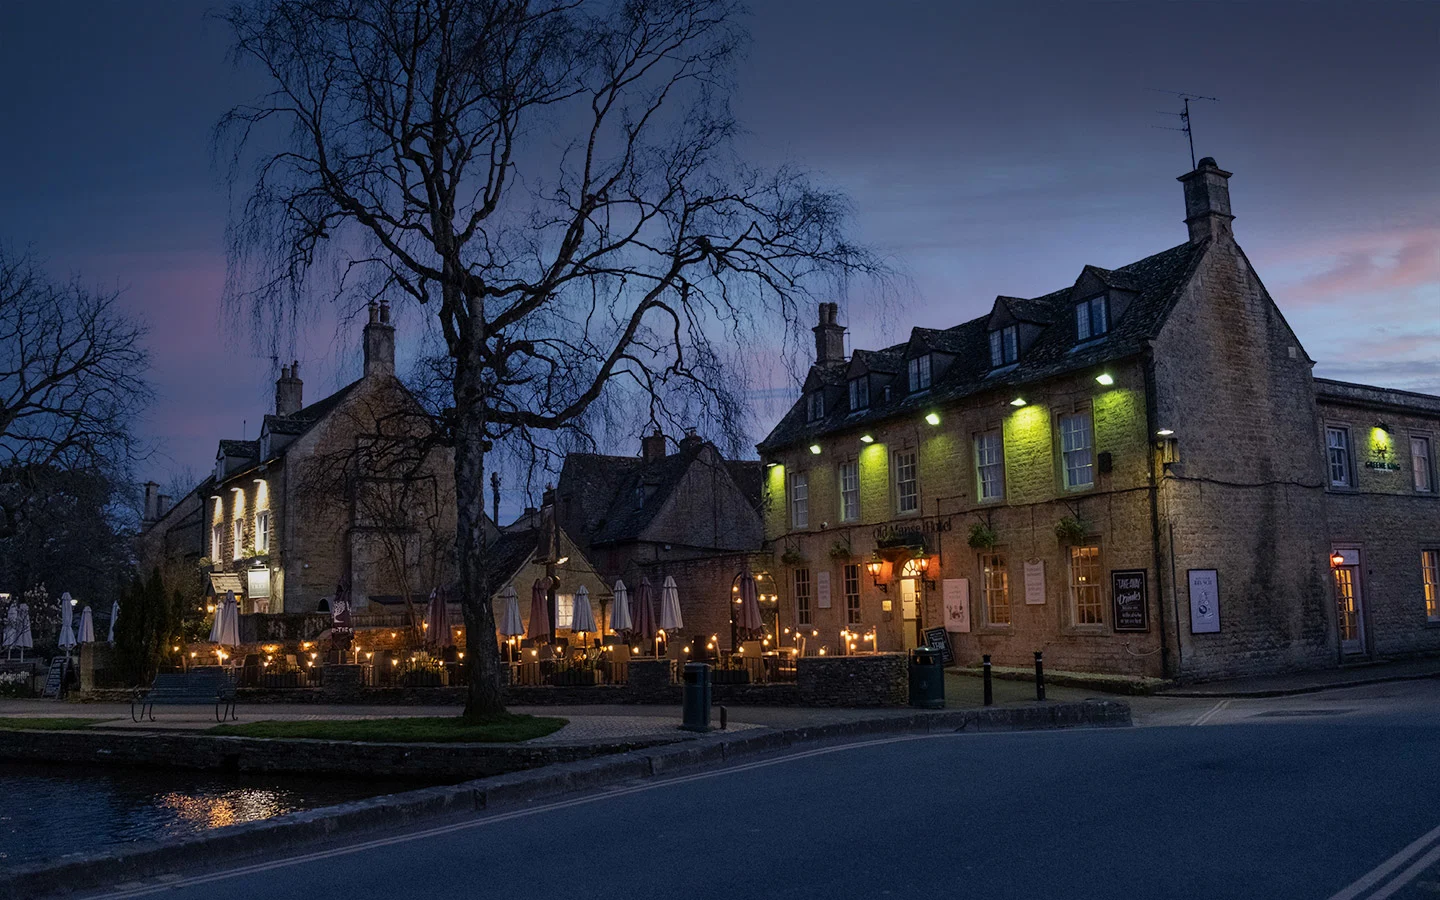 Bourton-on-the-Water by night